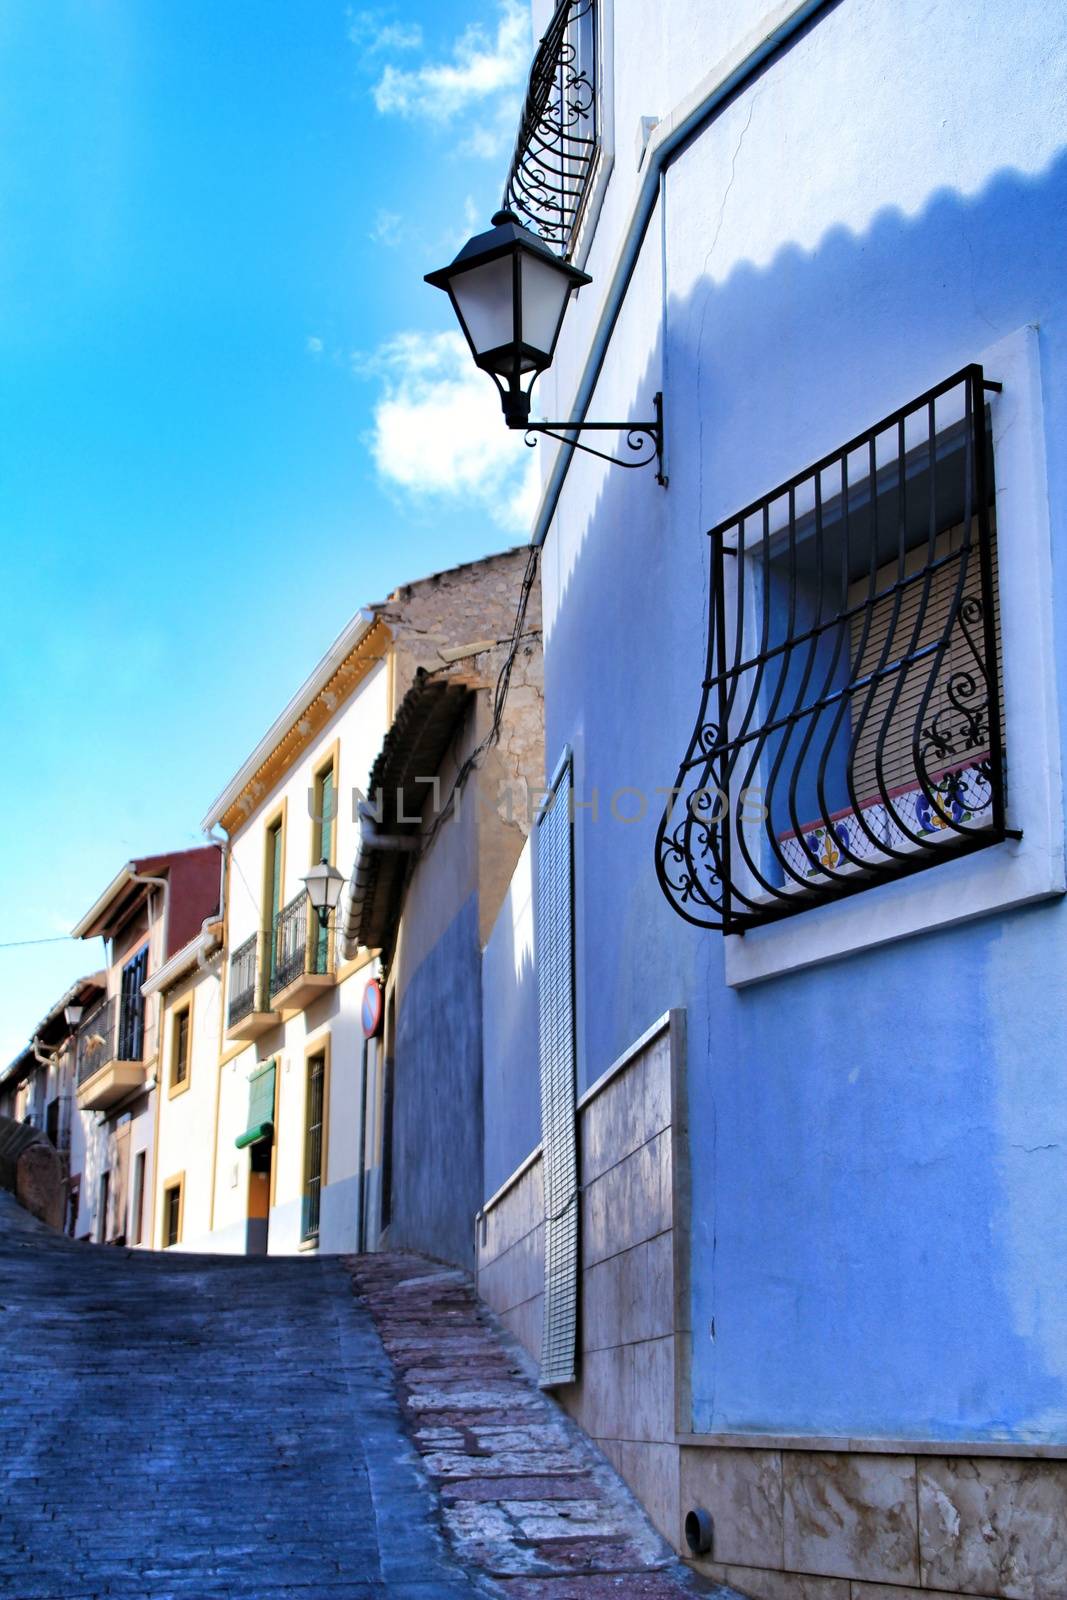 Streets and colorful facades of the town of Hondon de Las Nieves in Alicante, Spain under blue sky